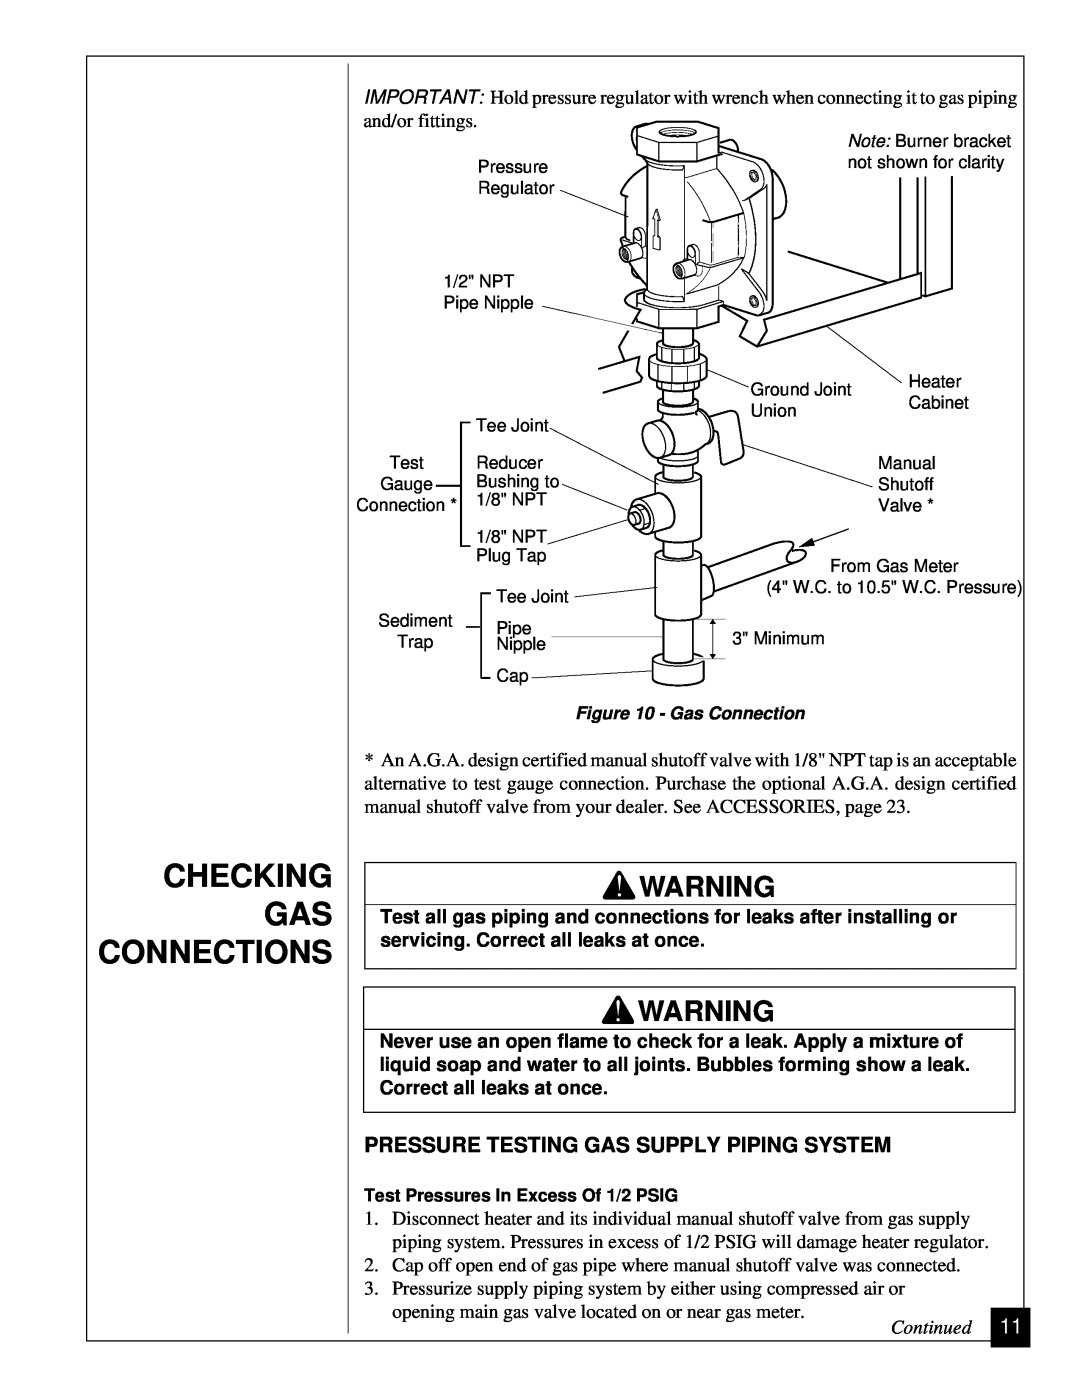 Vanguard Heating VGN30 installation manual Checking Gas Connections, Pressure Testing Gas Supply Piping System 